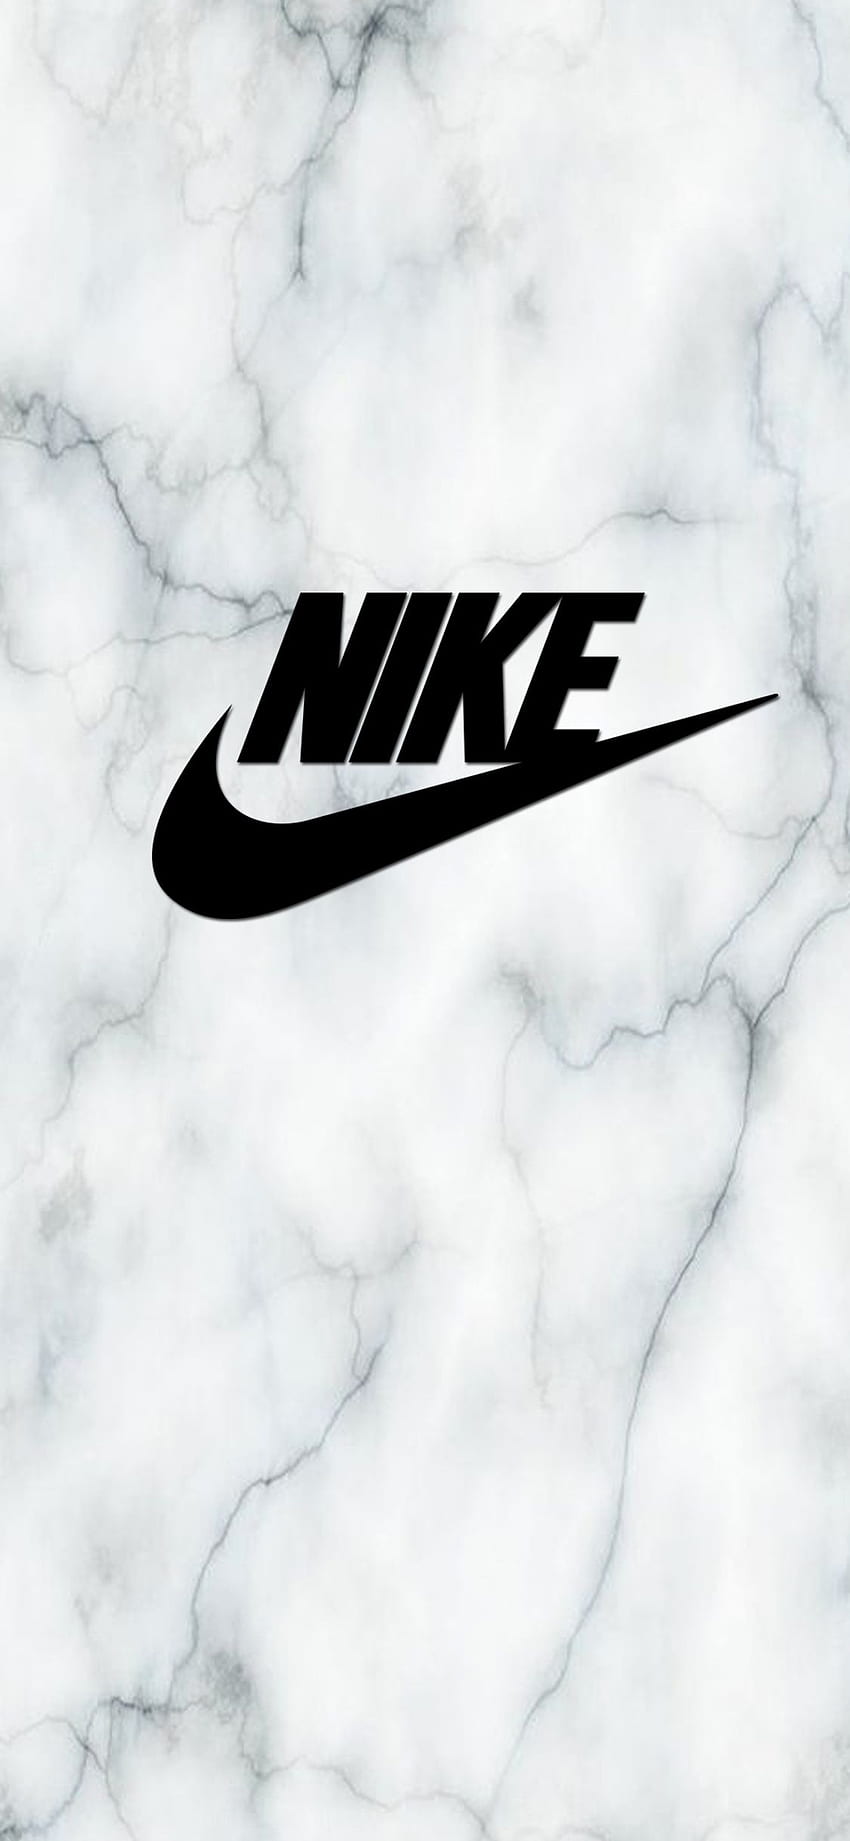 Nike iPhone X . You can order iphone case with this . Just click on :). Nike logo , Purple iphone, iPhone 8 plus, Nike Cloud HD phone wallpaper